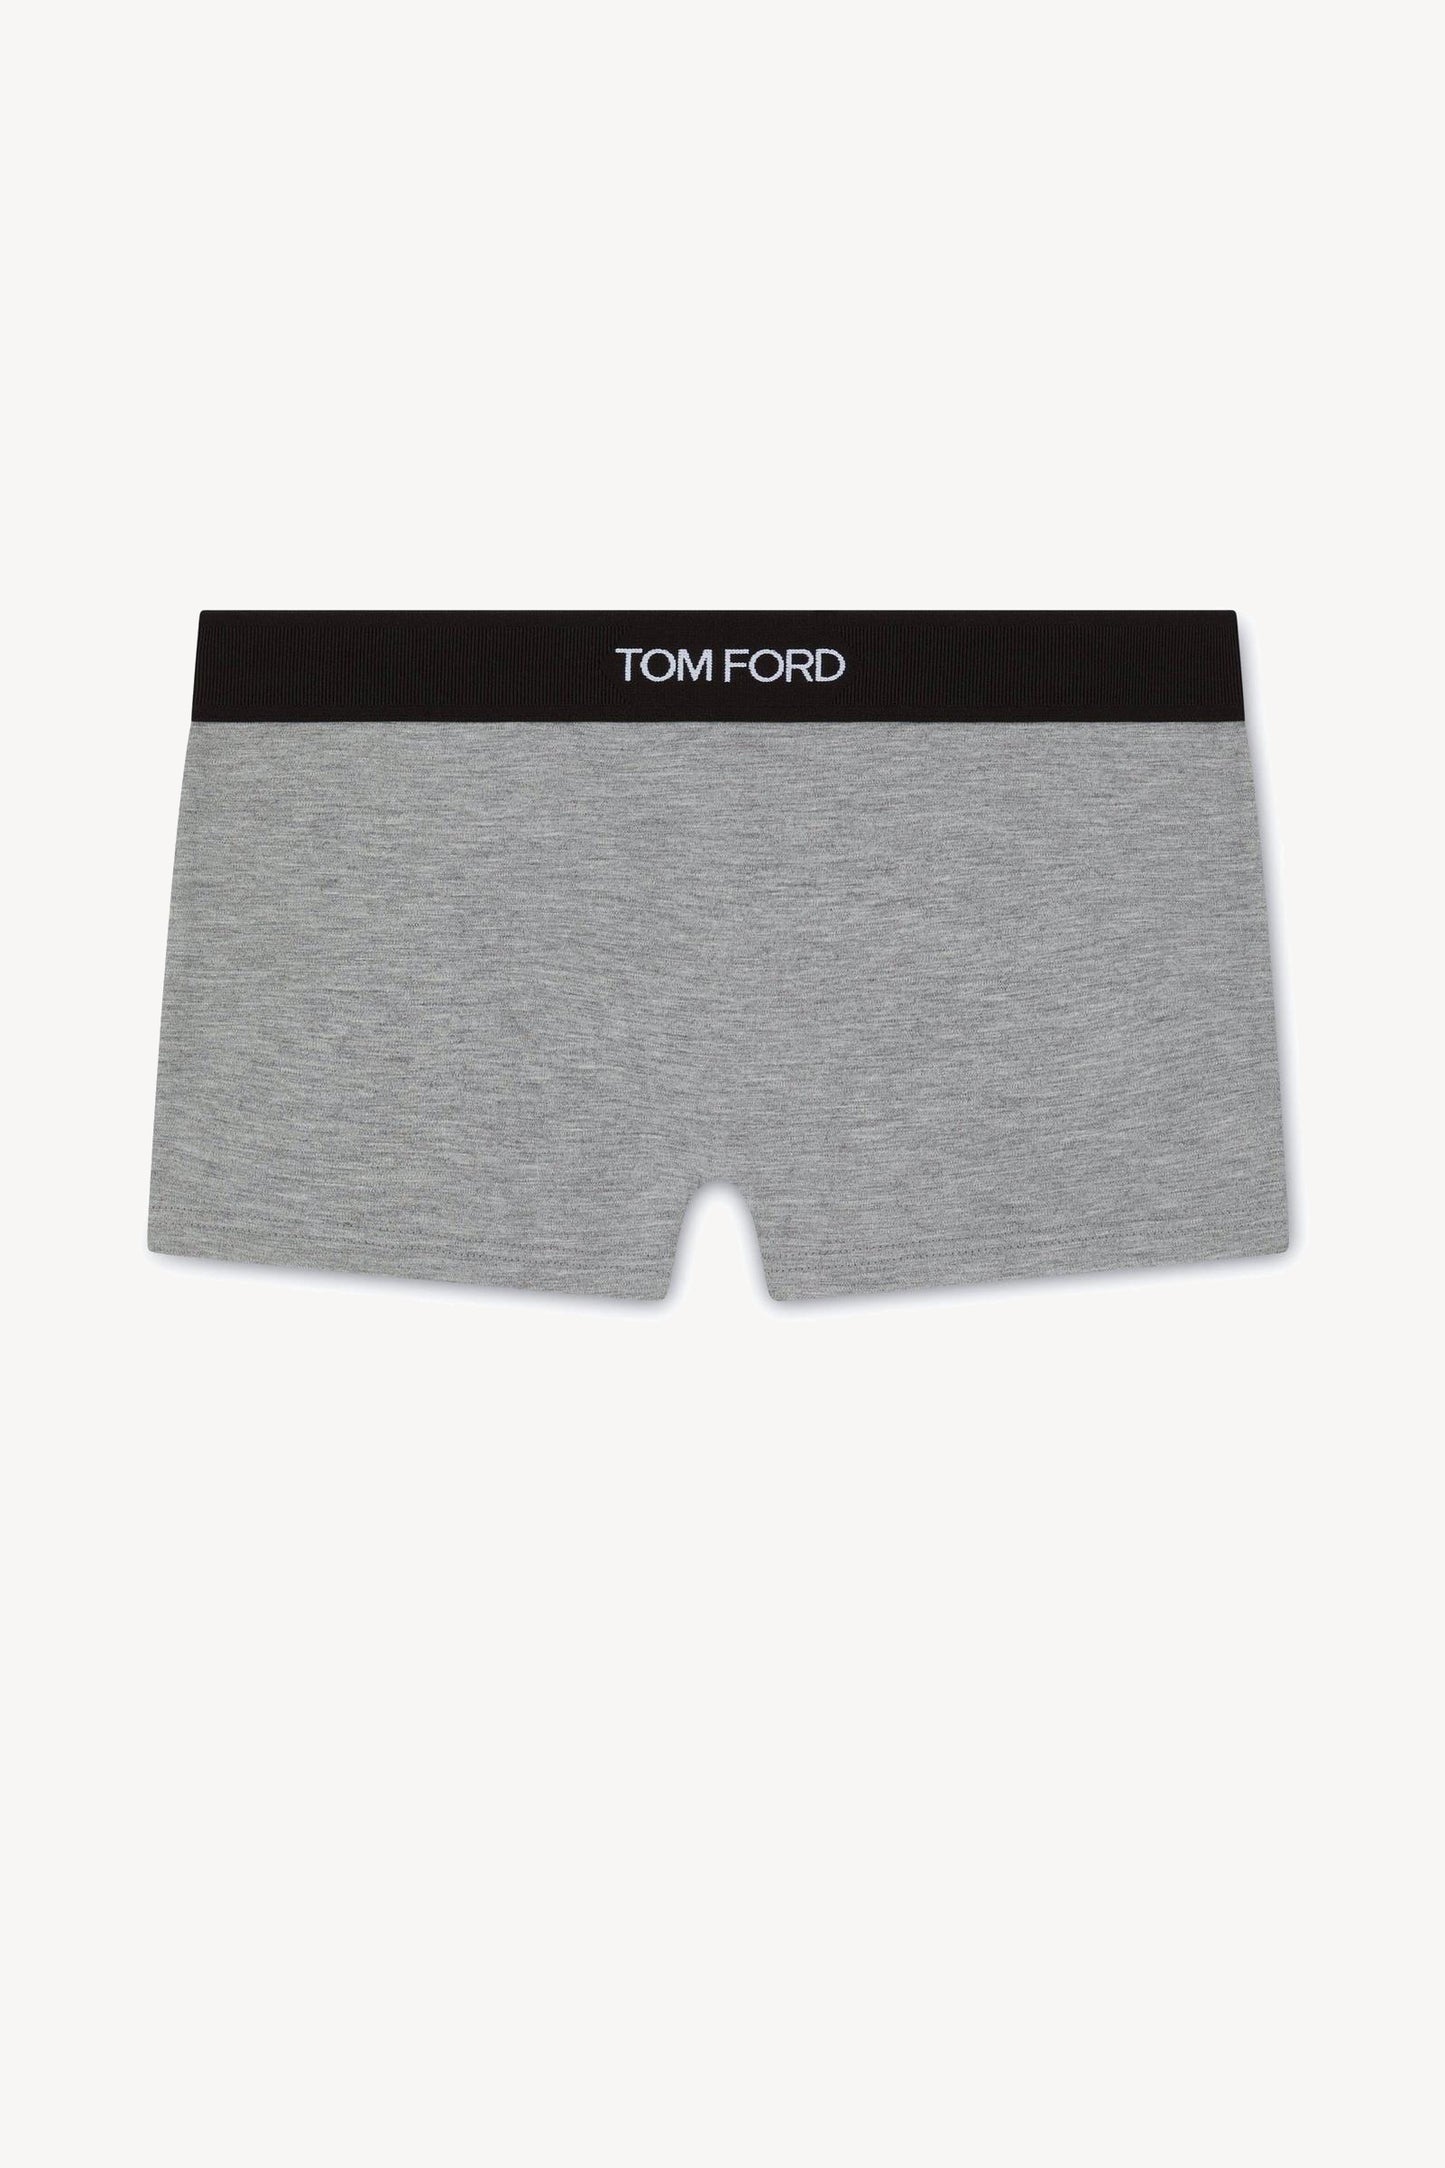 Boxers Signature in GrauTom Ford - Anita Hass